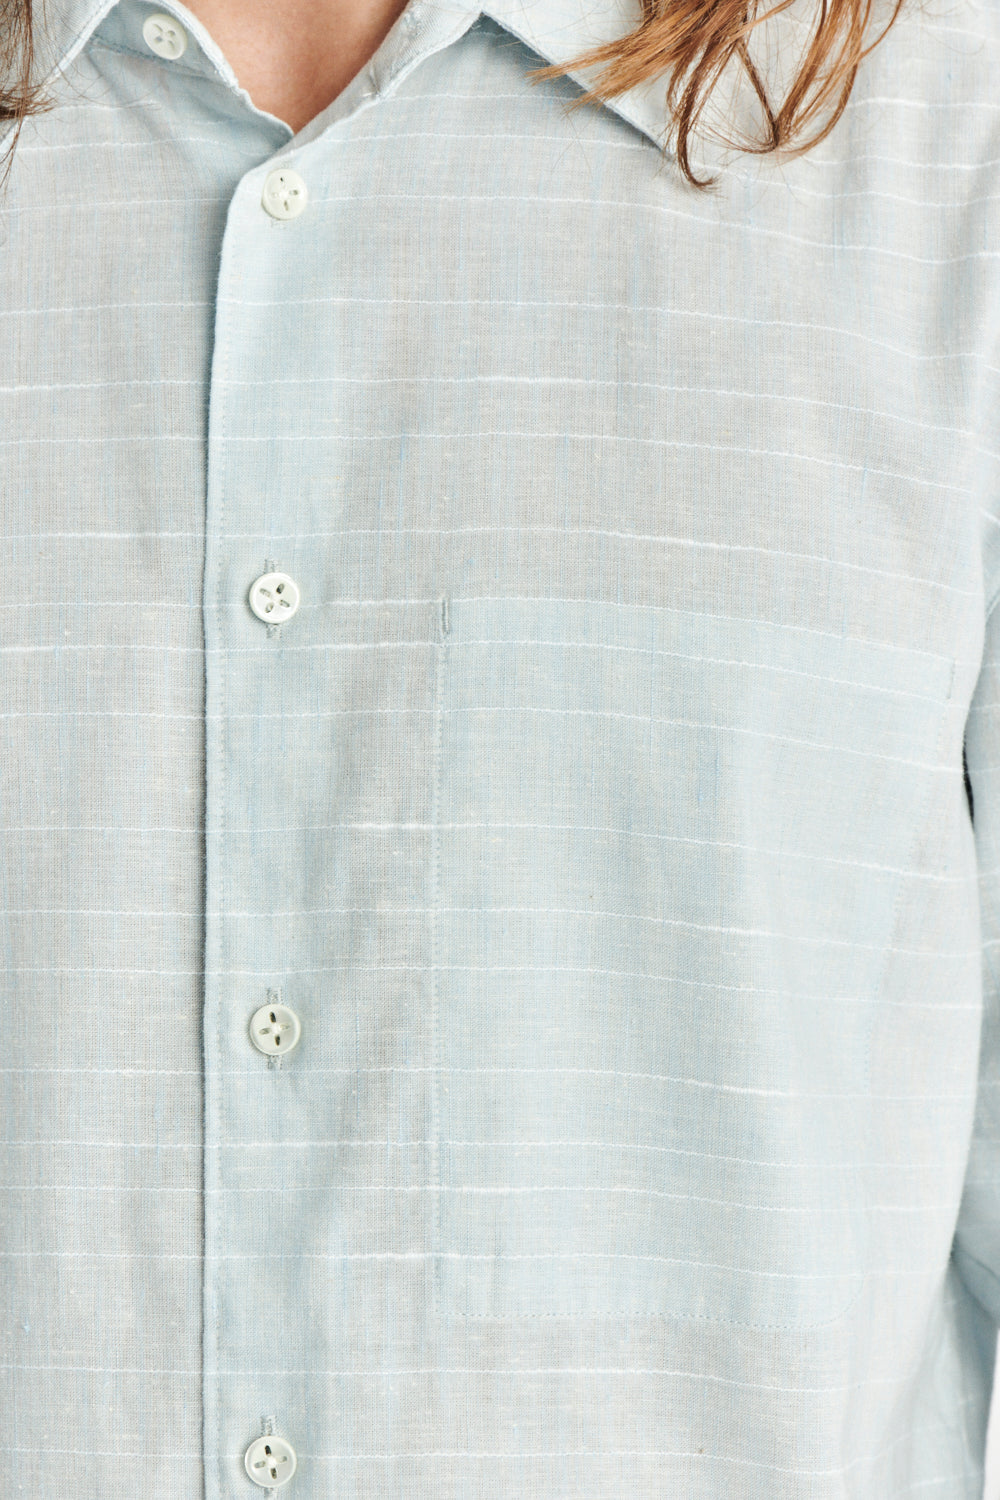 Feel Good Shirt in a Subtle Light Blue Mix of Portuguese Cotton, Linen and Pineapple